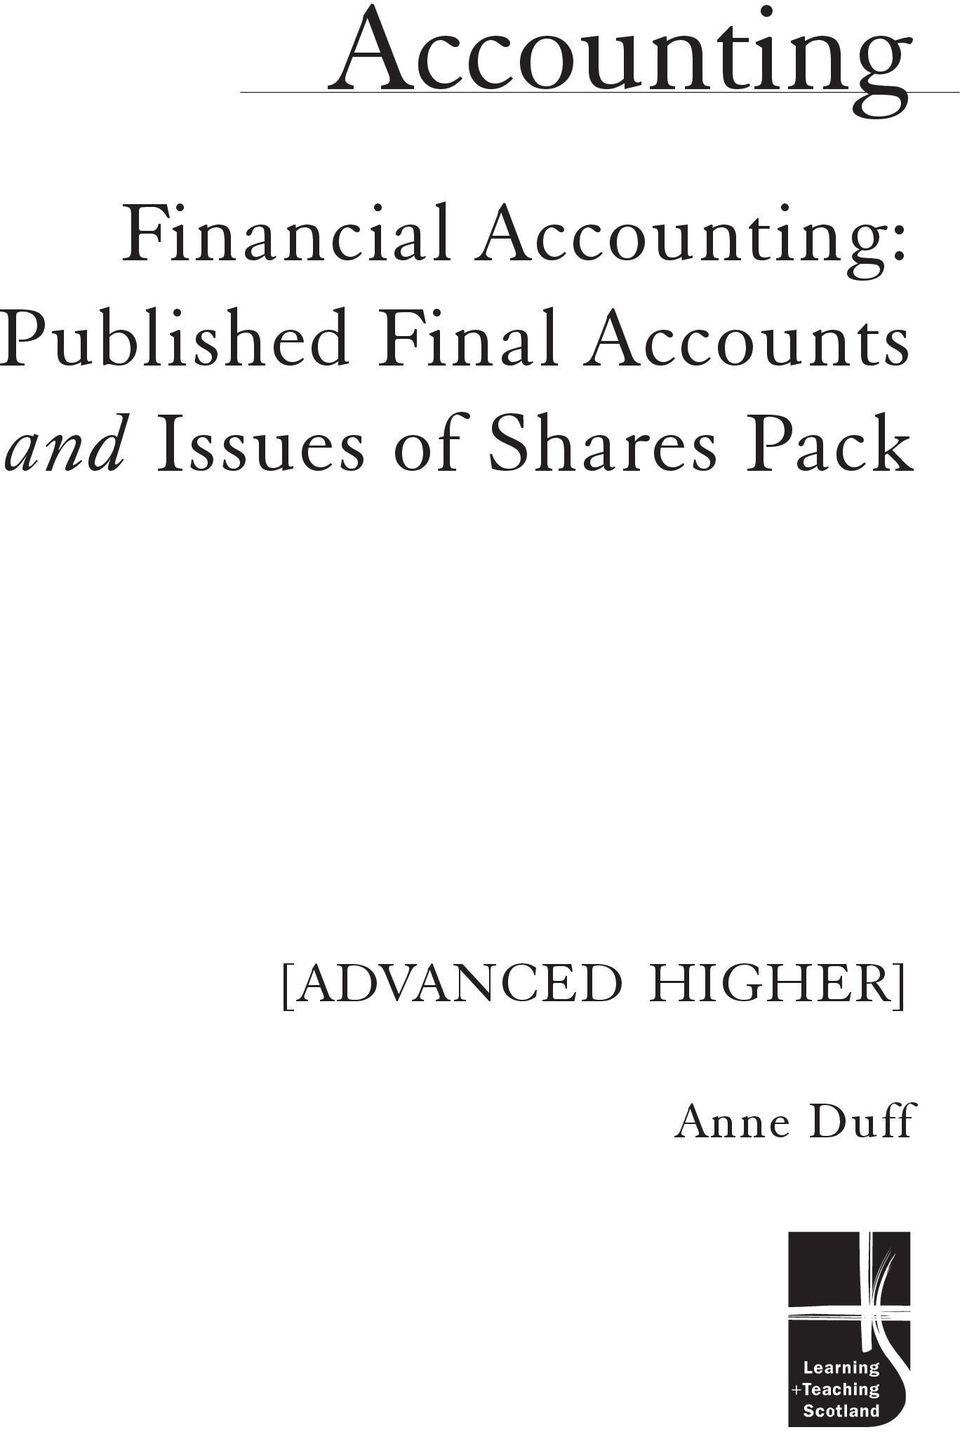 Accounts and Issues of